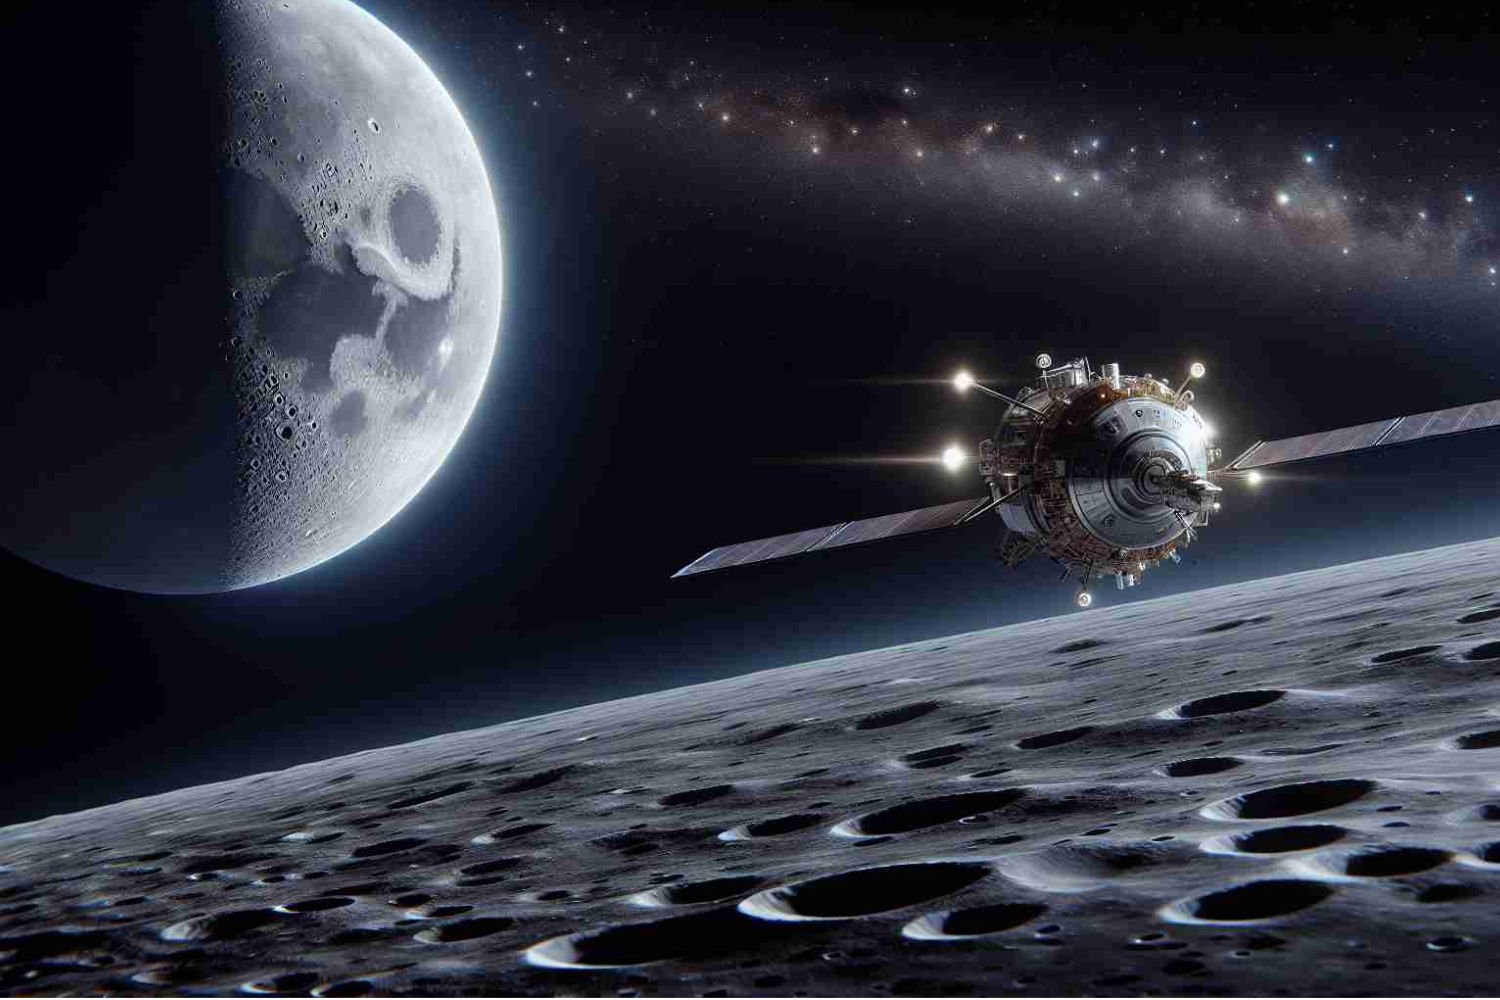 This unknown company plans to land on the moon later this month